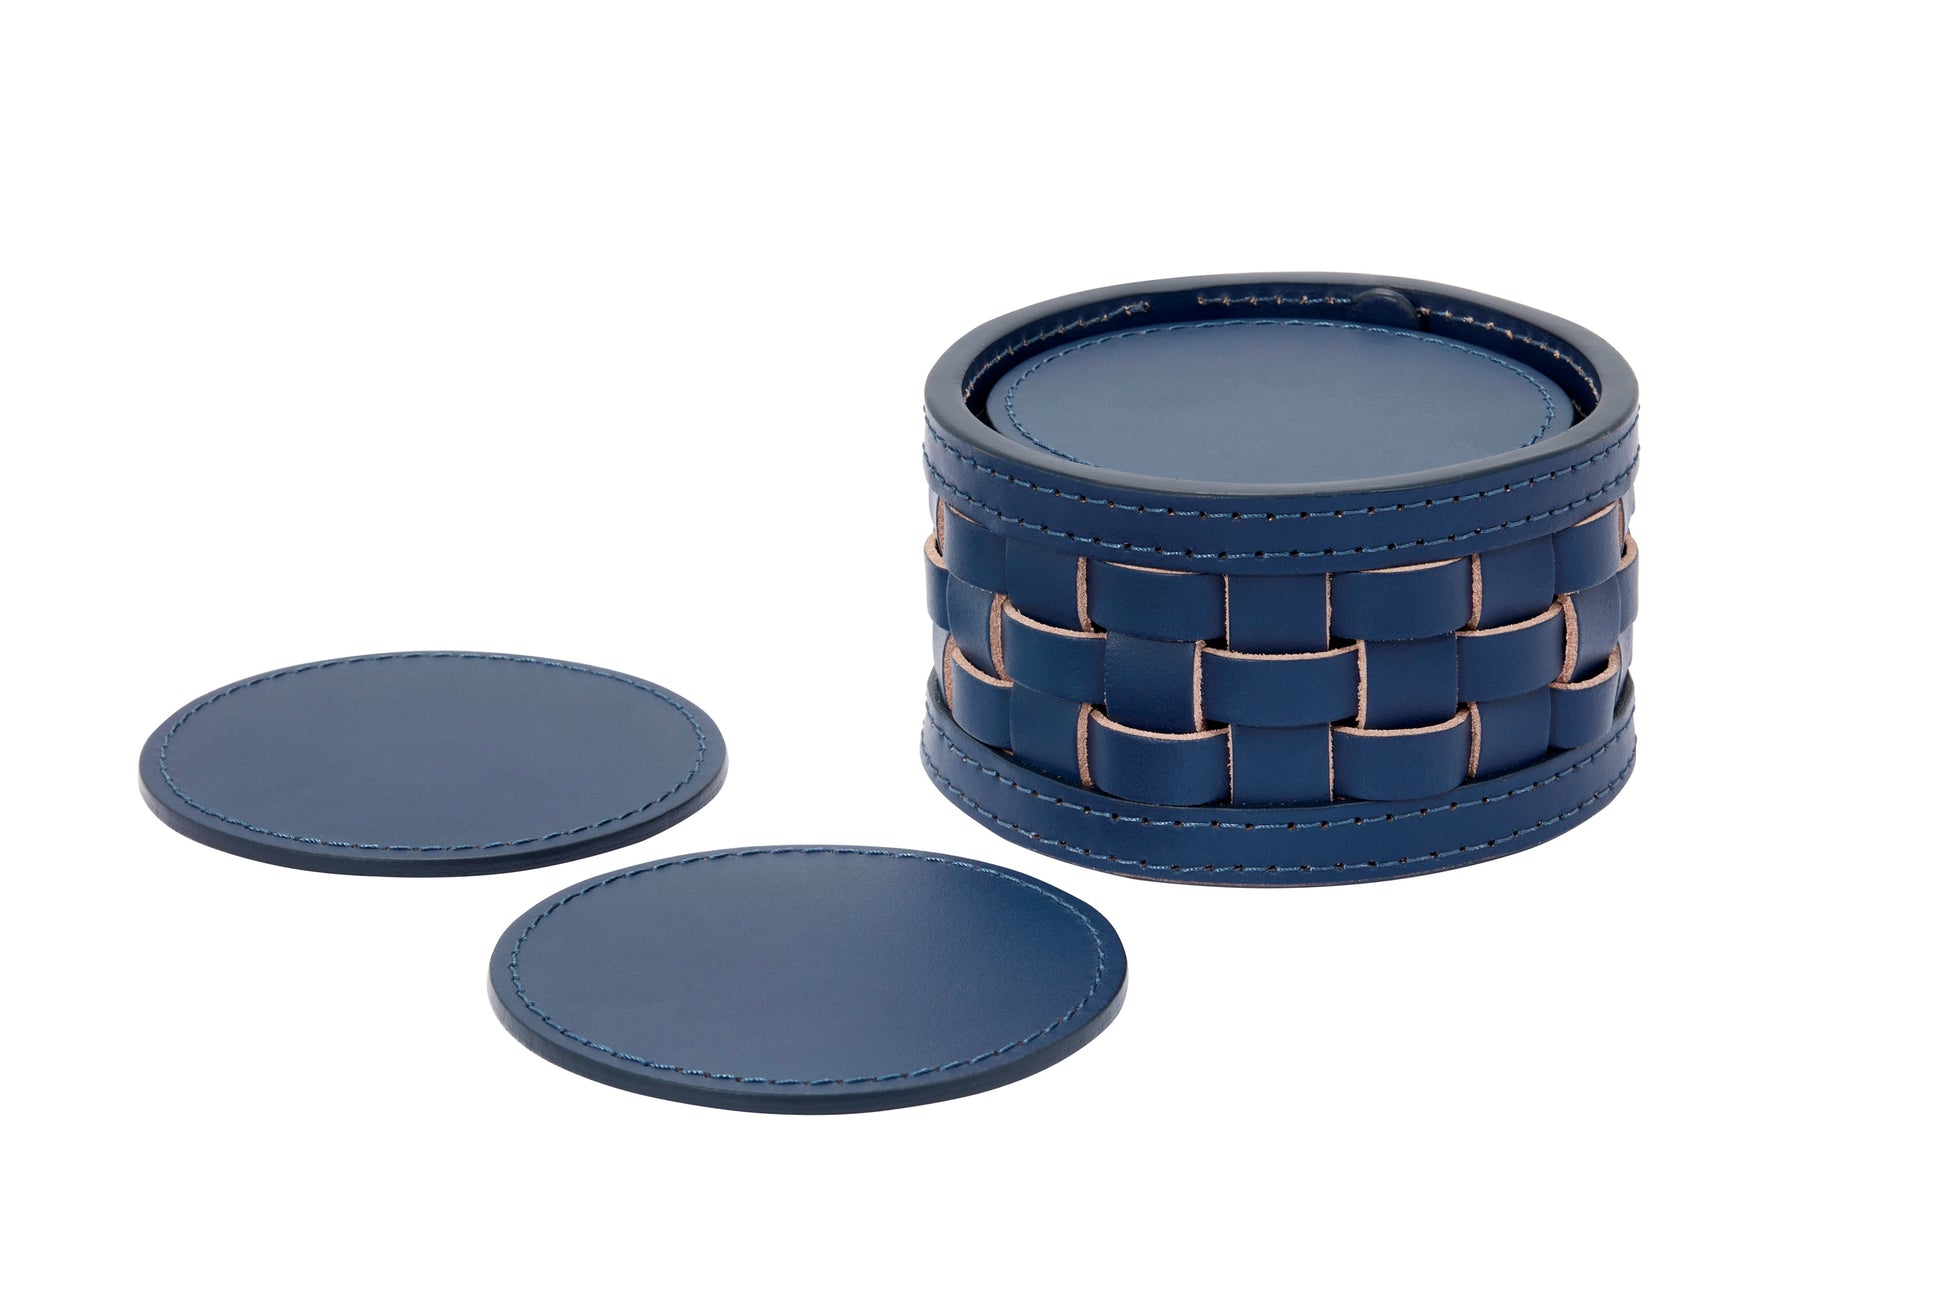 Riviere Barcellona Coaster Holder | Set of 10 Leather Coasters | Presented in a Woven Round Box | Ideal for Yacht Decor | Available at 2Jour Concierge, #1 luxury high-end gift & lifestyle shop